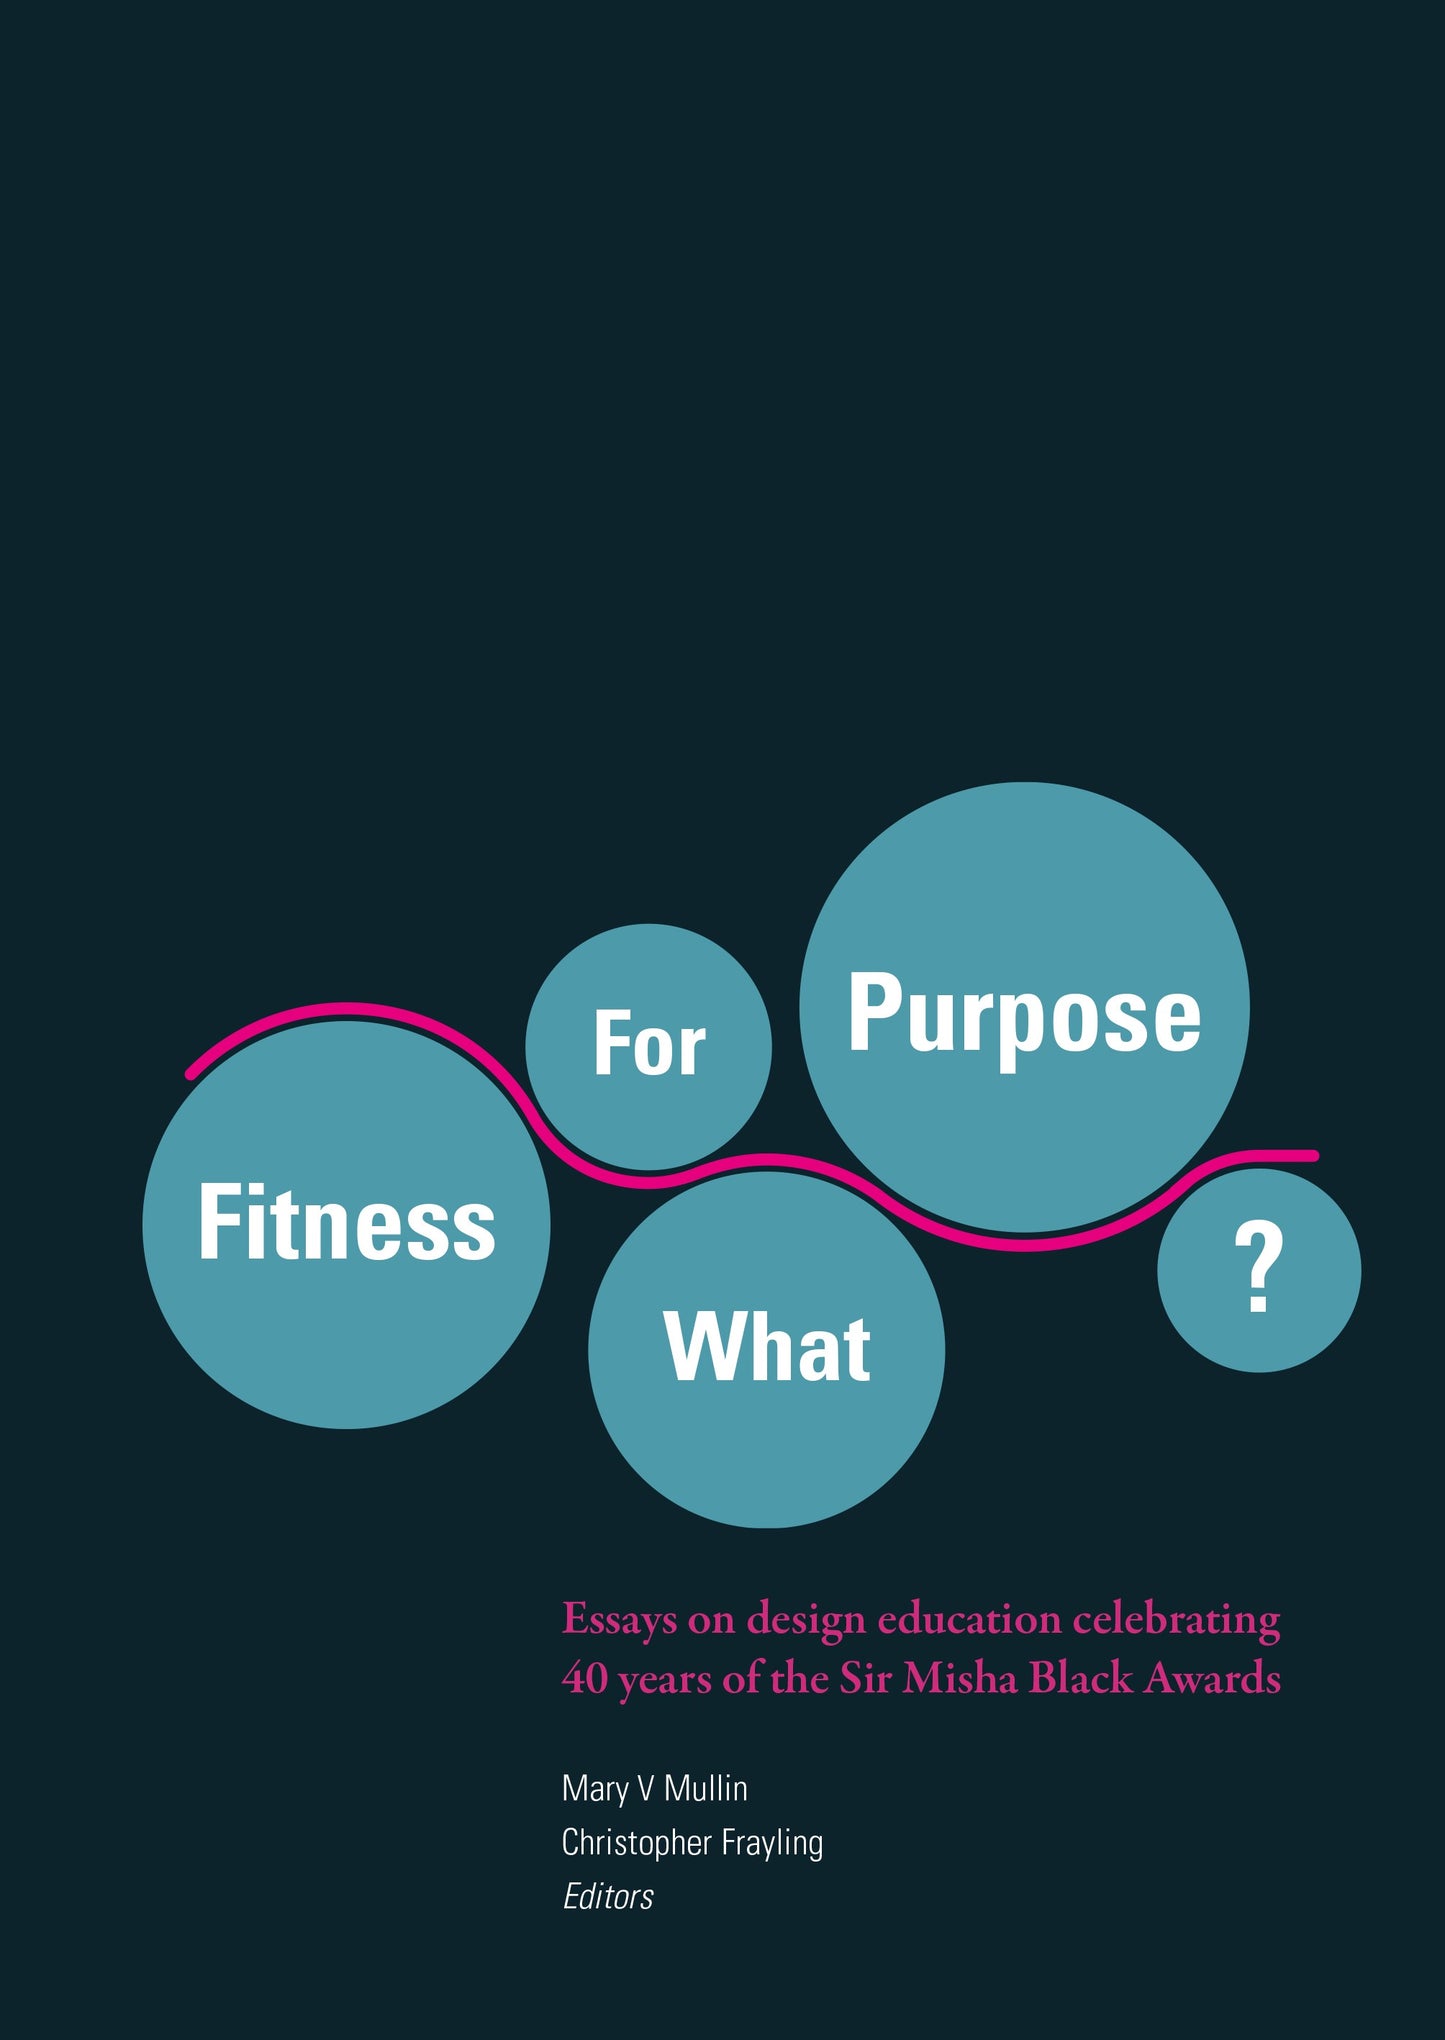 FITNESS FOR WHAT PURPOSE? edited by Mary V. Mullin and Christopher Frayling